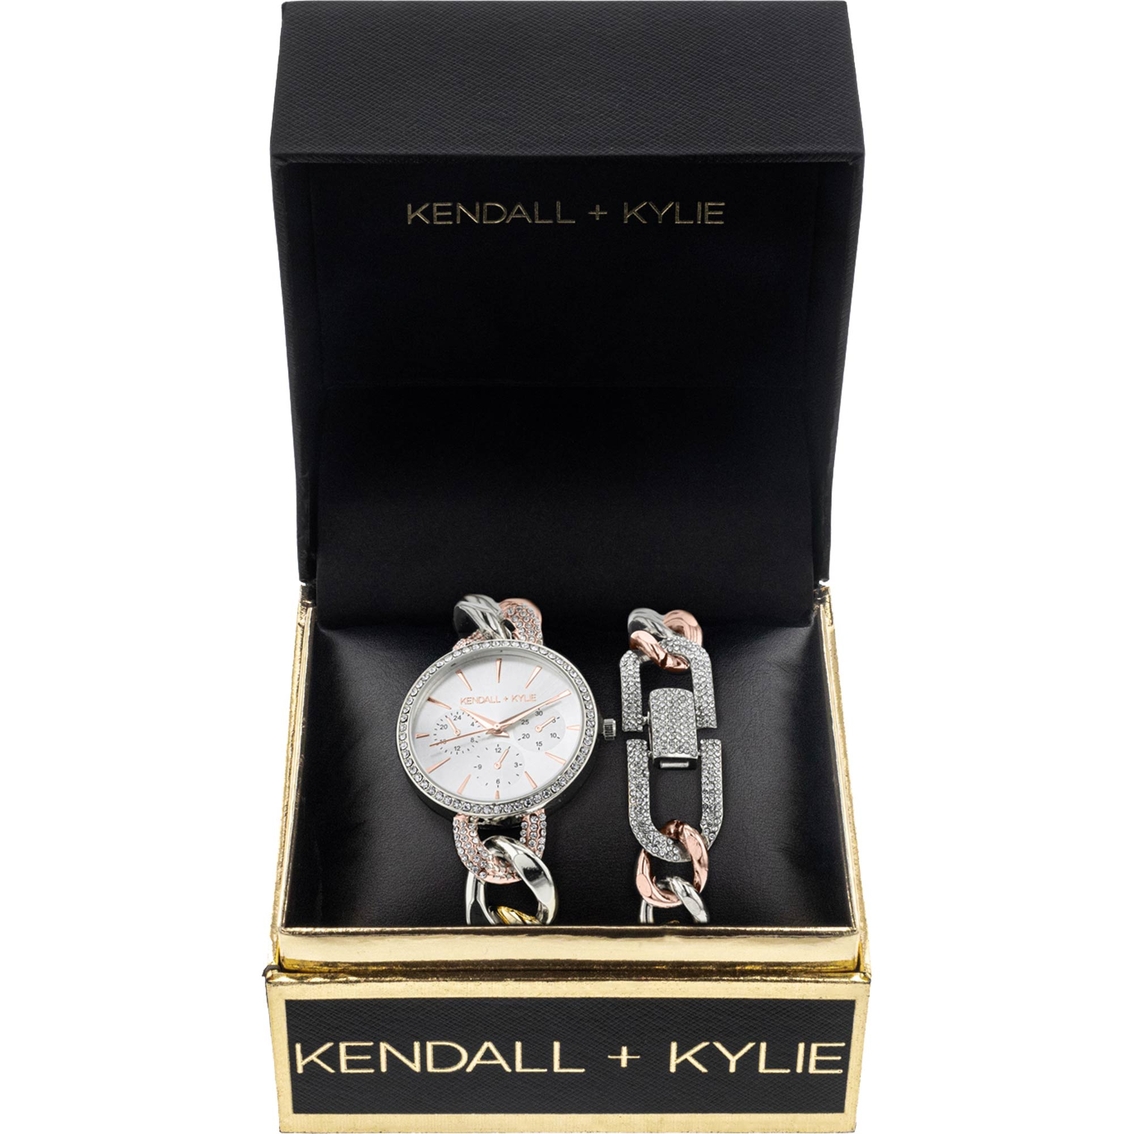 Kendall + Kylie Open Link Mock Chronograph Analog Watch and Bracelet Set - Image 3 of 3